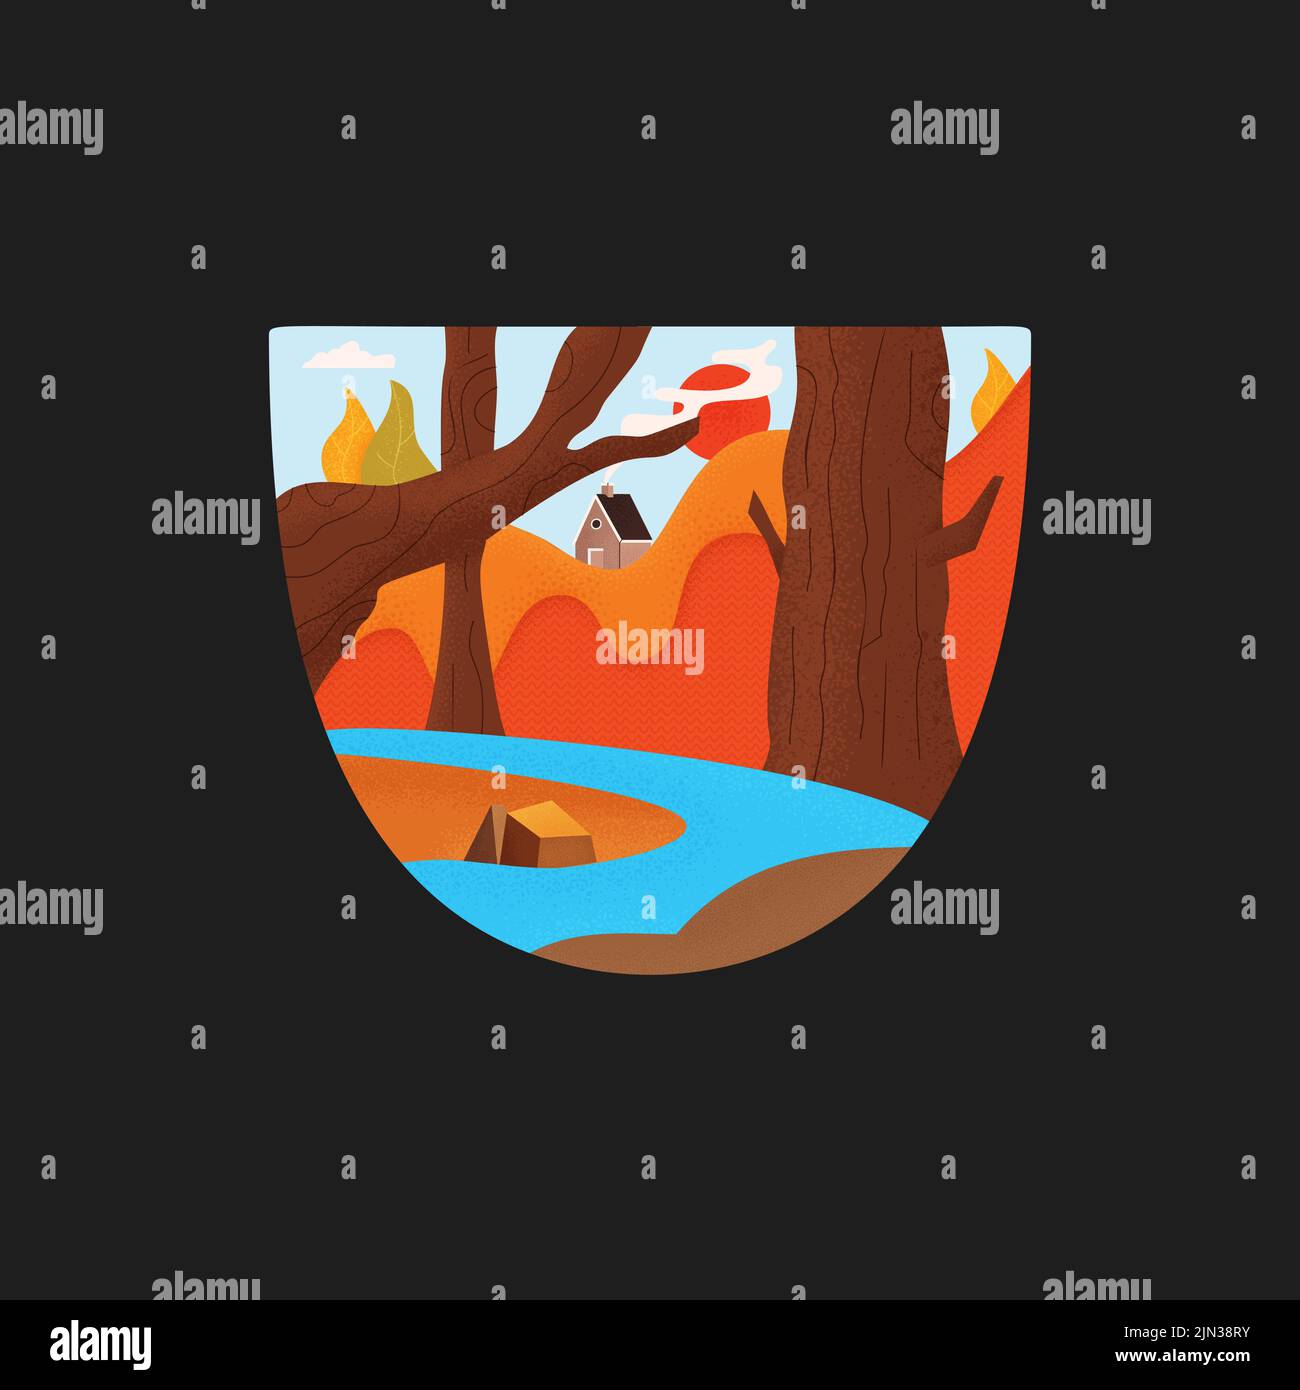 Flat style bright colorful vector illustration of graphic emblem and t shirt design with blue river flowing through forested mountains. Stock Vector